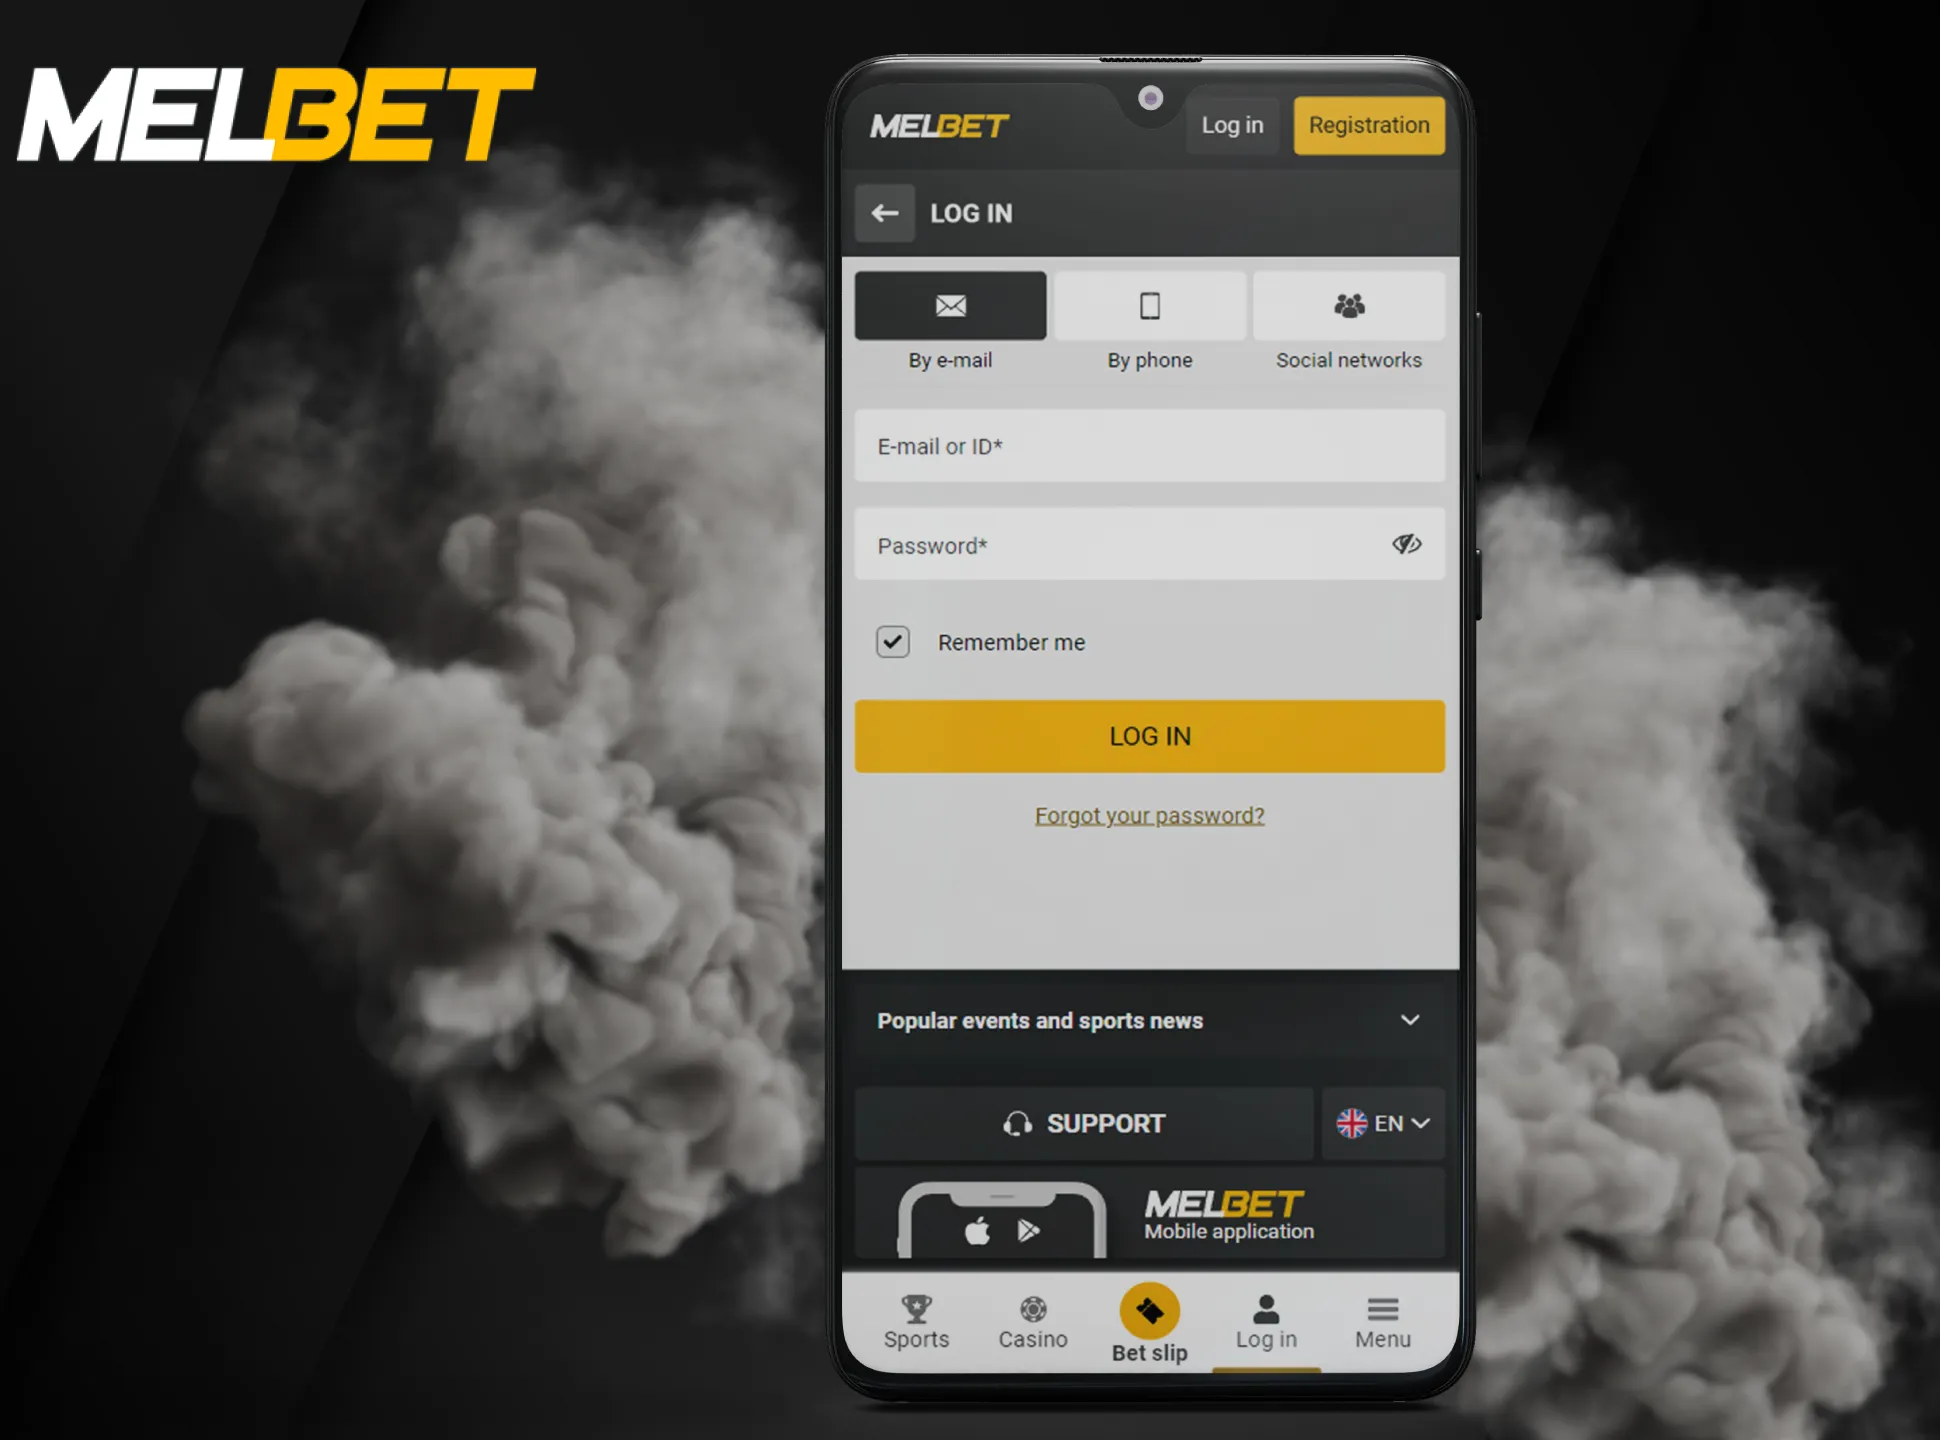 Enter your username and password to log in to Melbet.